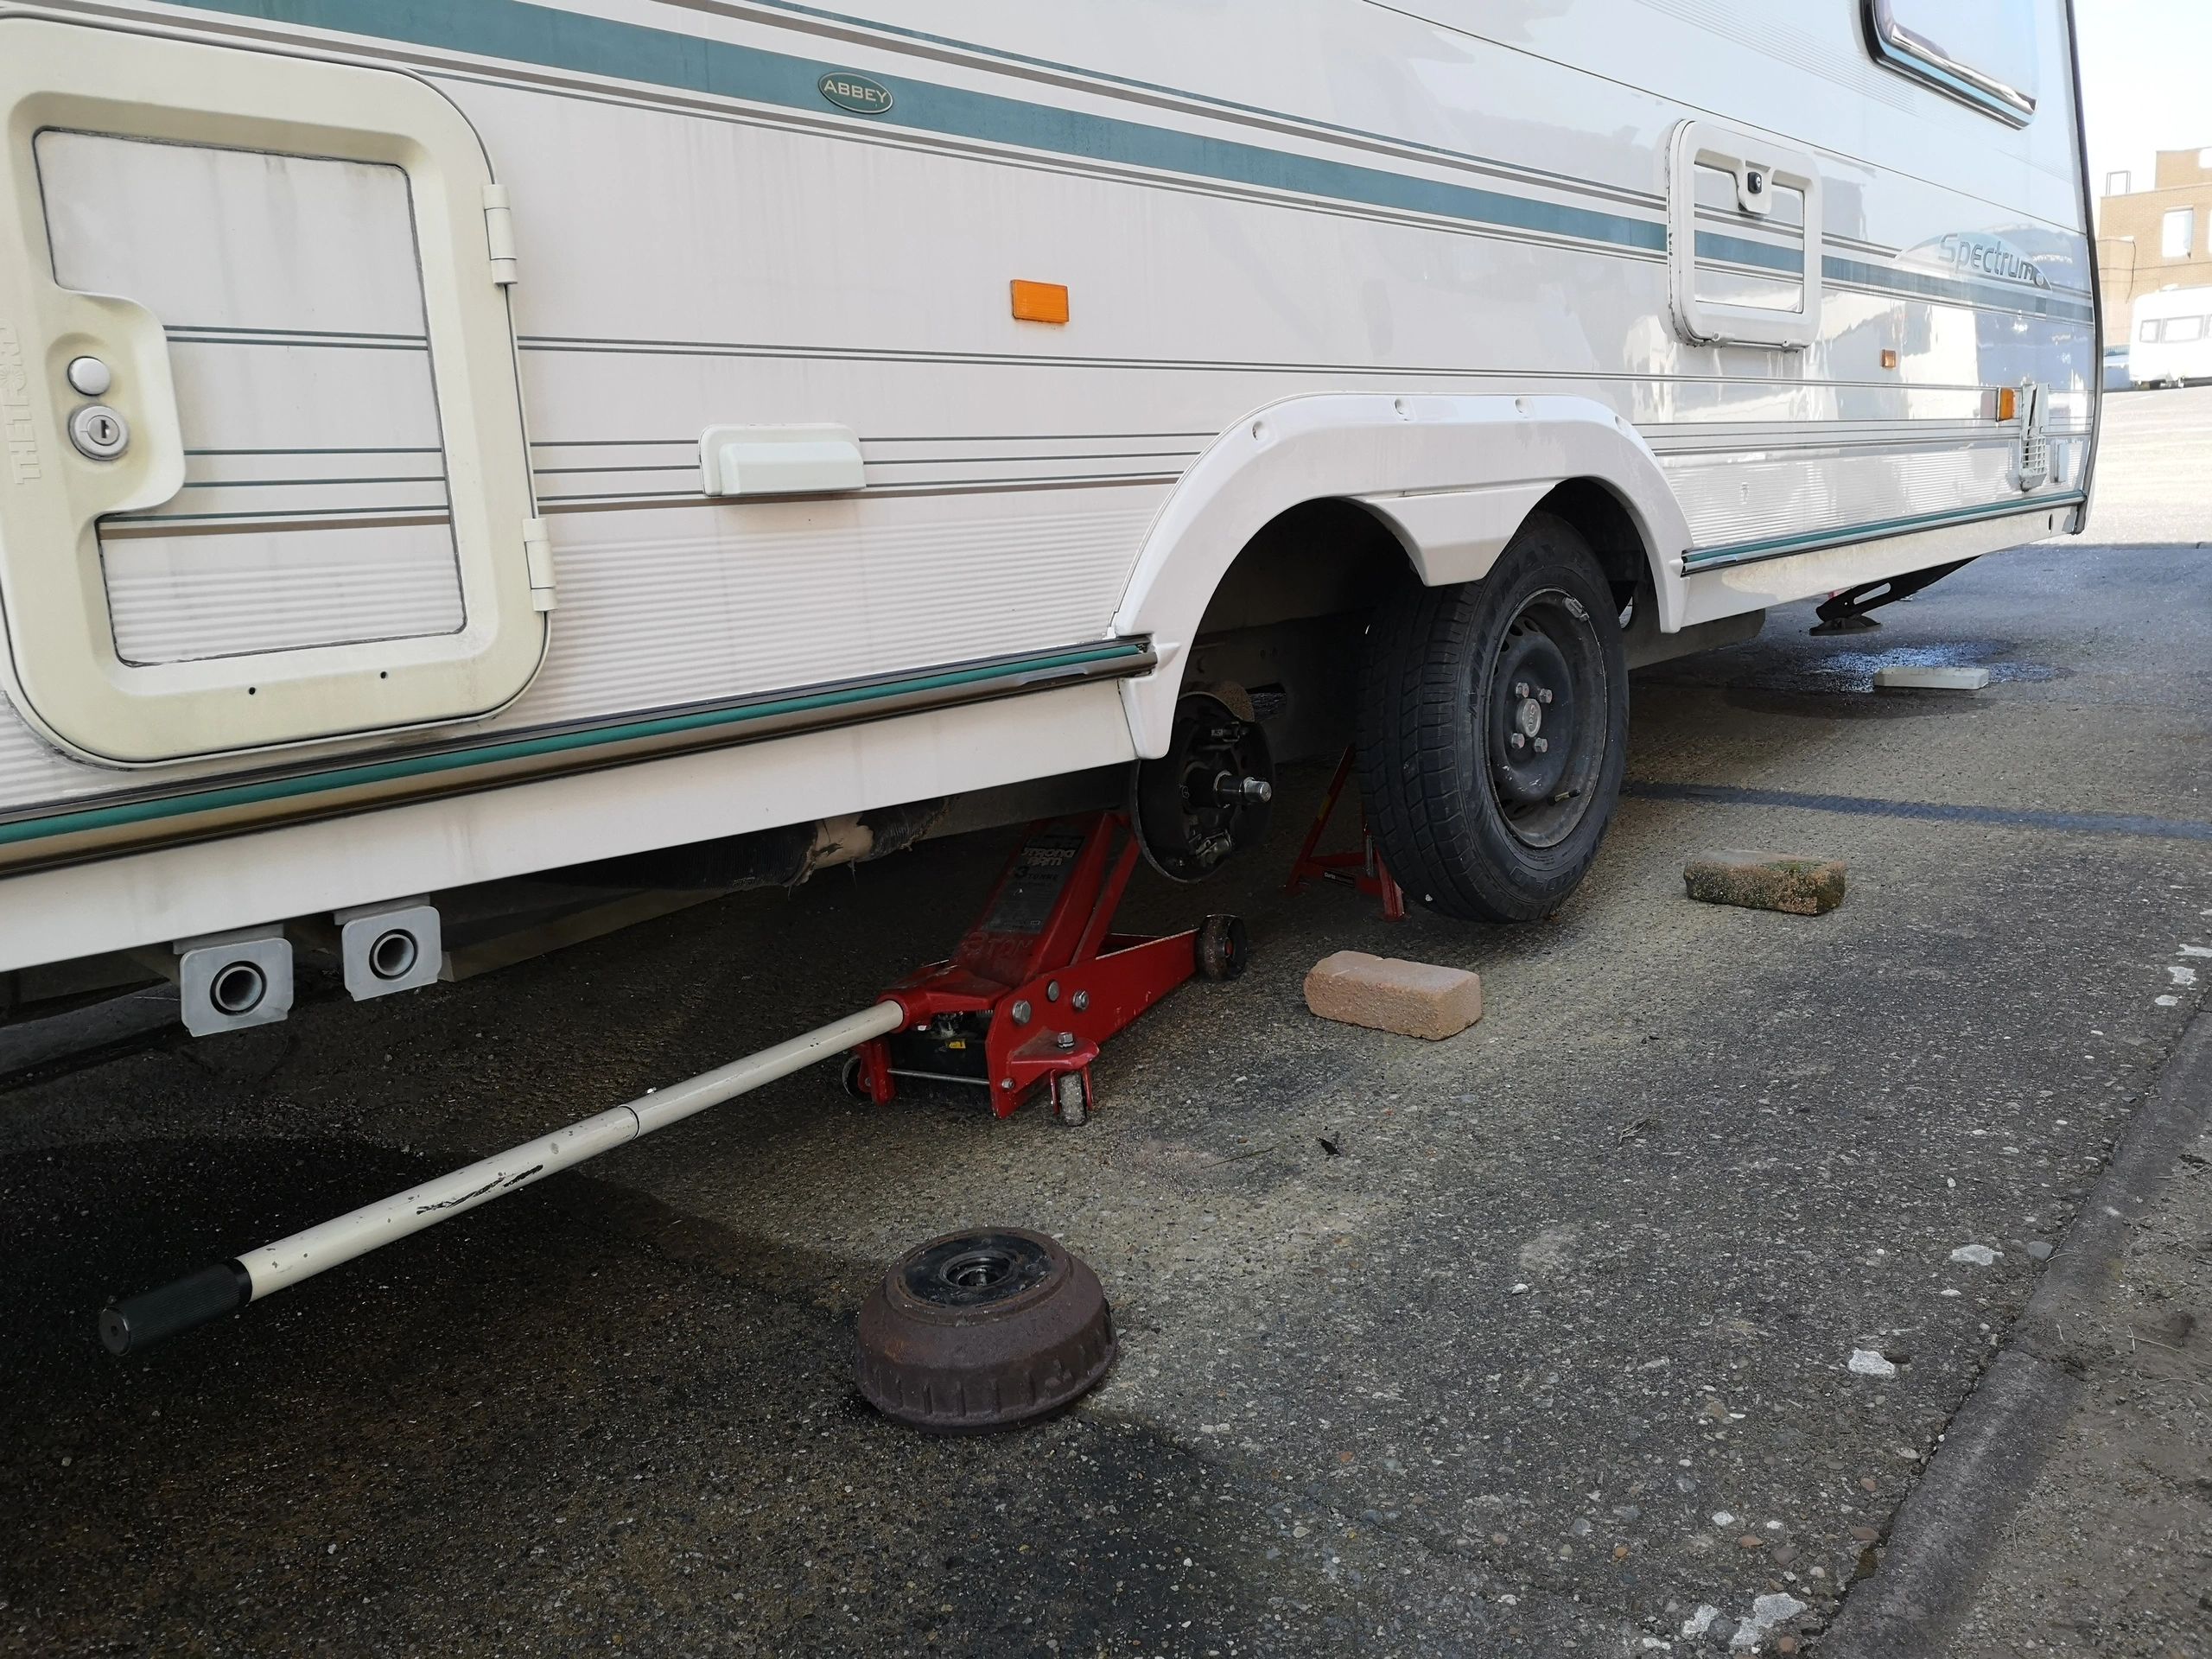 Caravan brakes being checked for safety